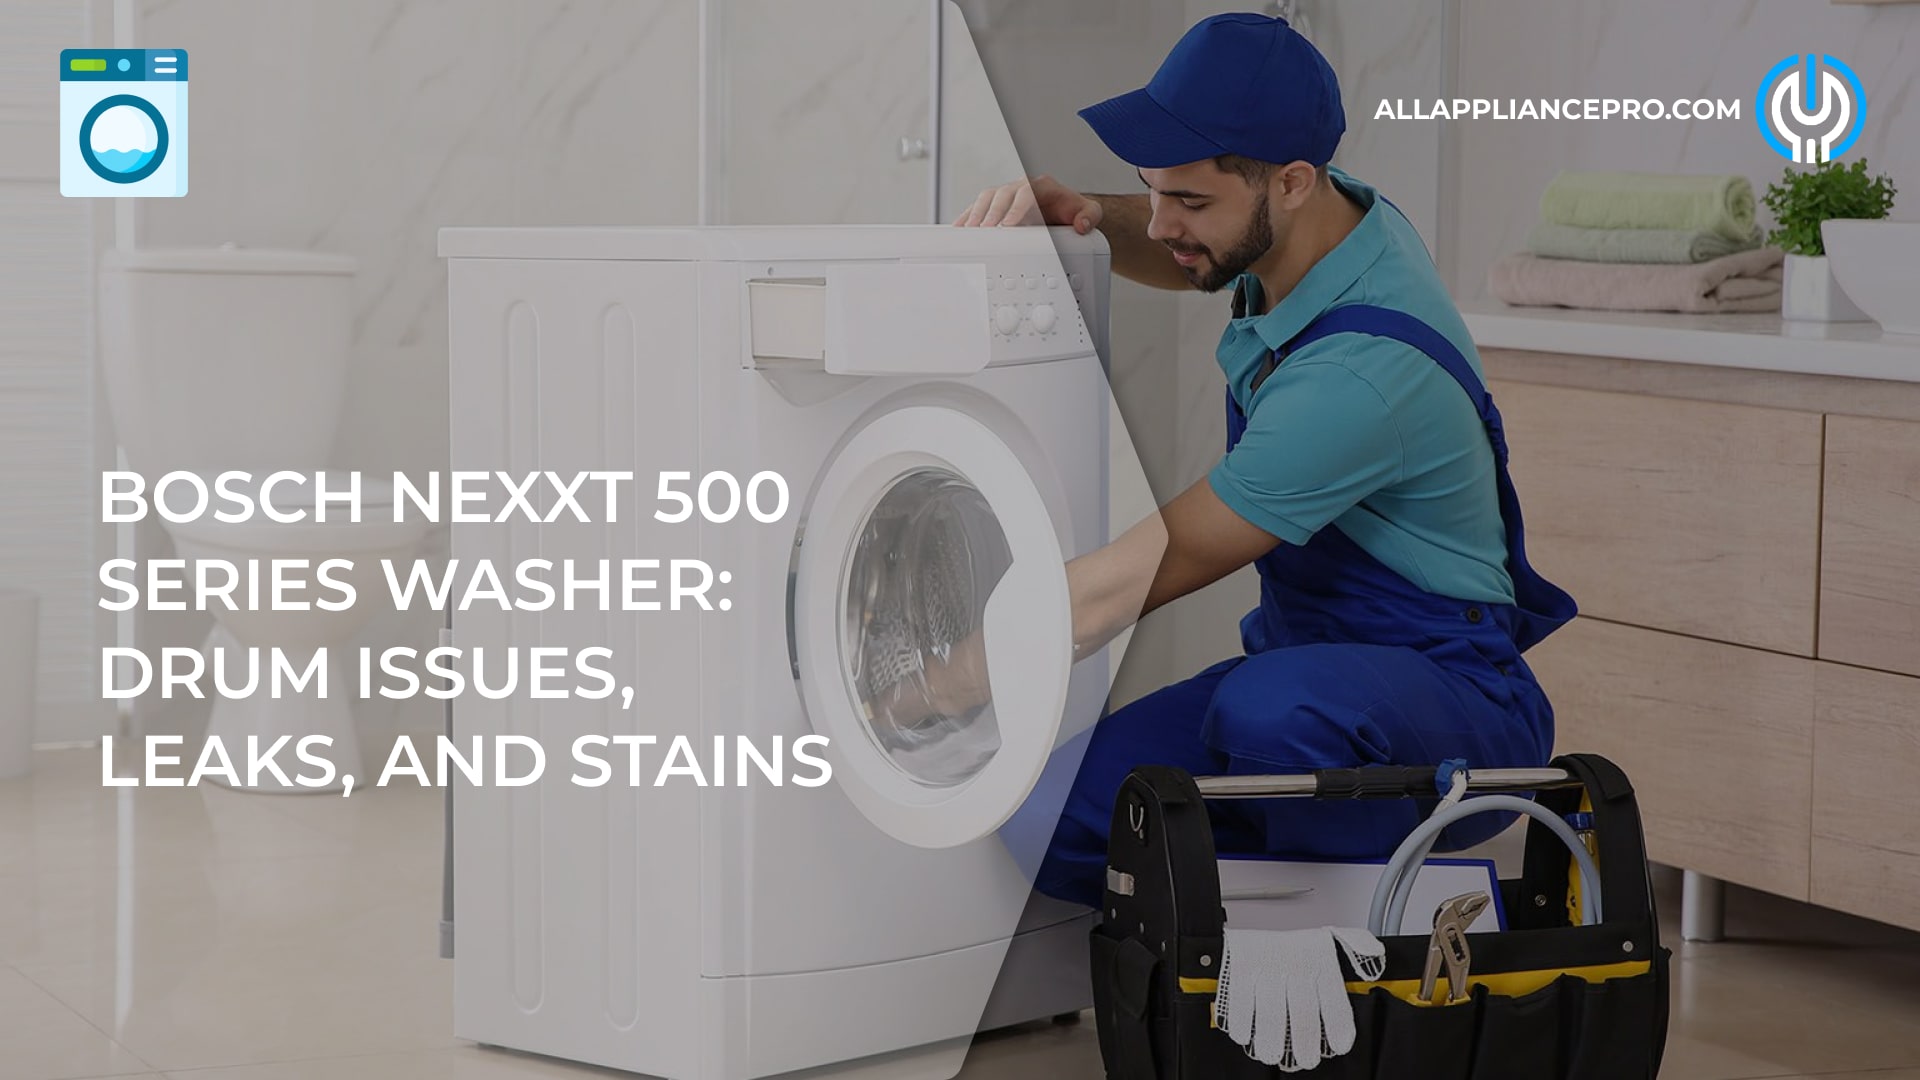 Bosch Nexxt 500 Series Washer: Drum Issues, Leaks, and Stains